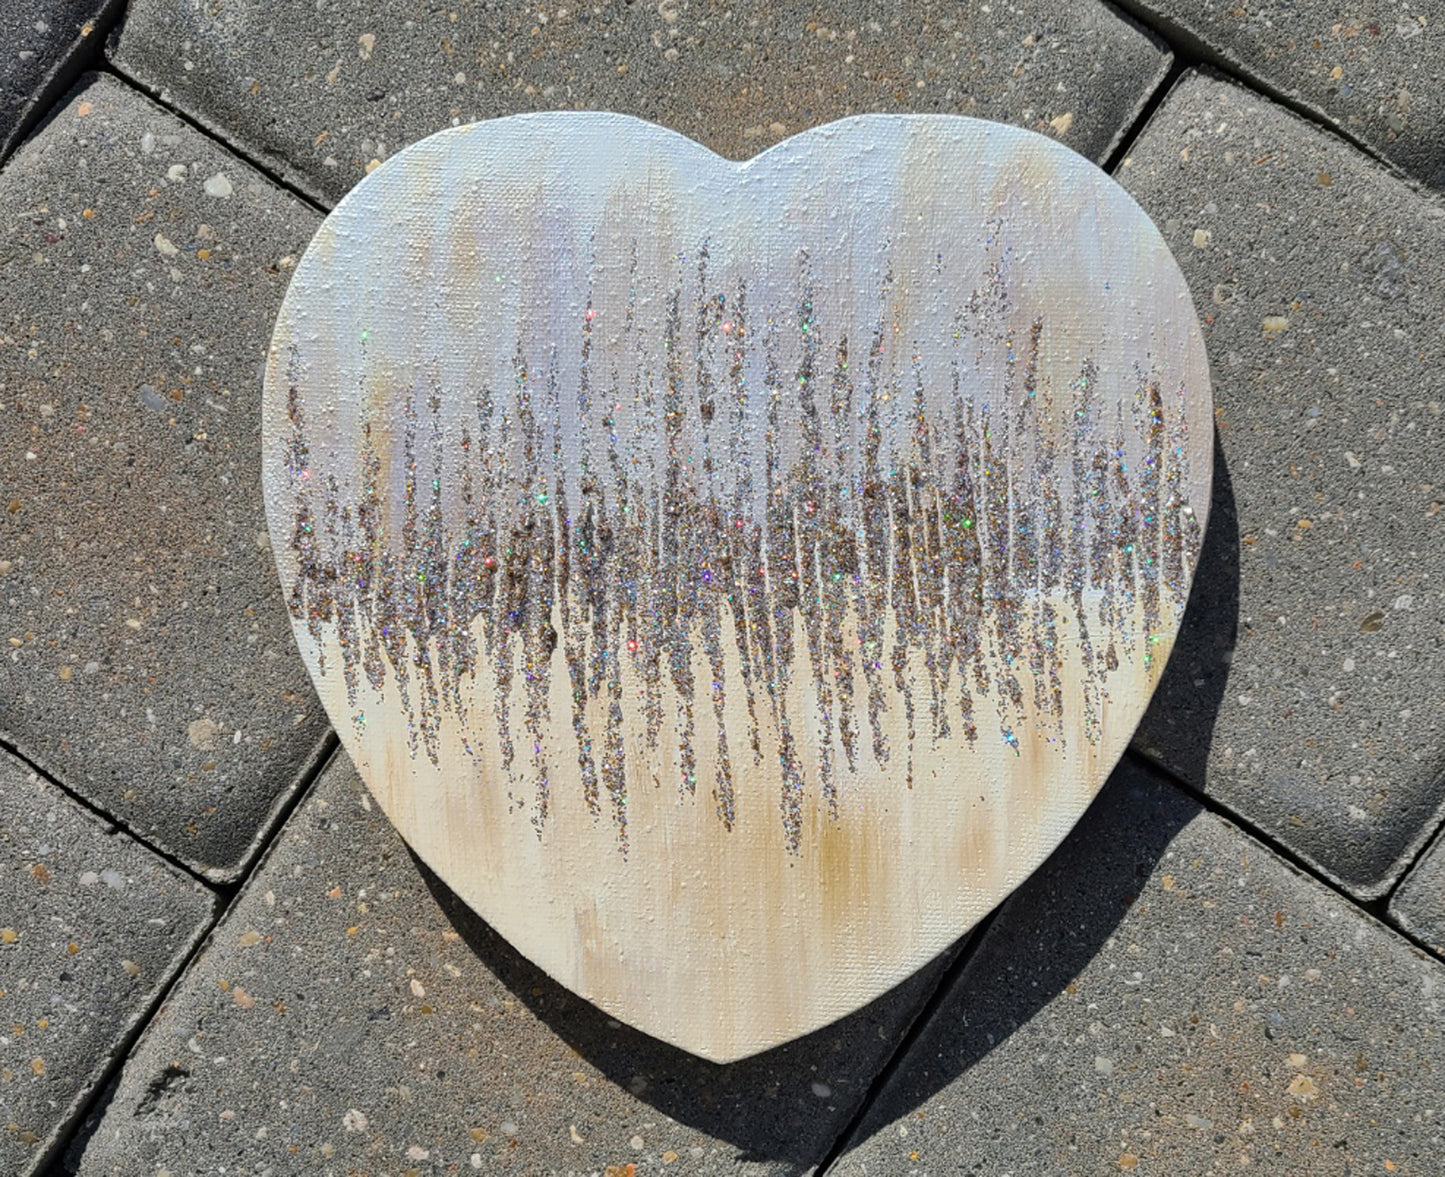 8 inch tall heart shaped canvas.  Painted in a Shabby Chic style, off white with shades of gold and brown overlay.  Center line of various metal tones of glitter are spread up and down for an effect that looks like a fast heartbeat.